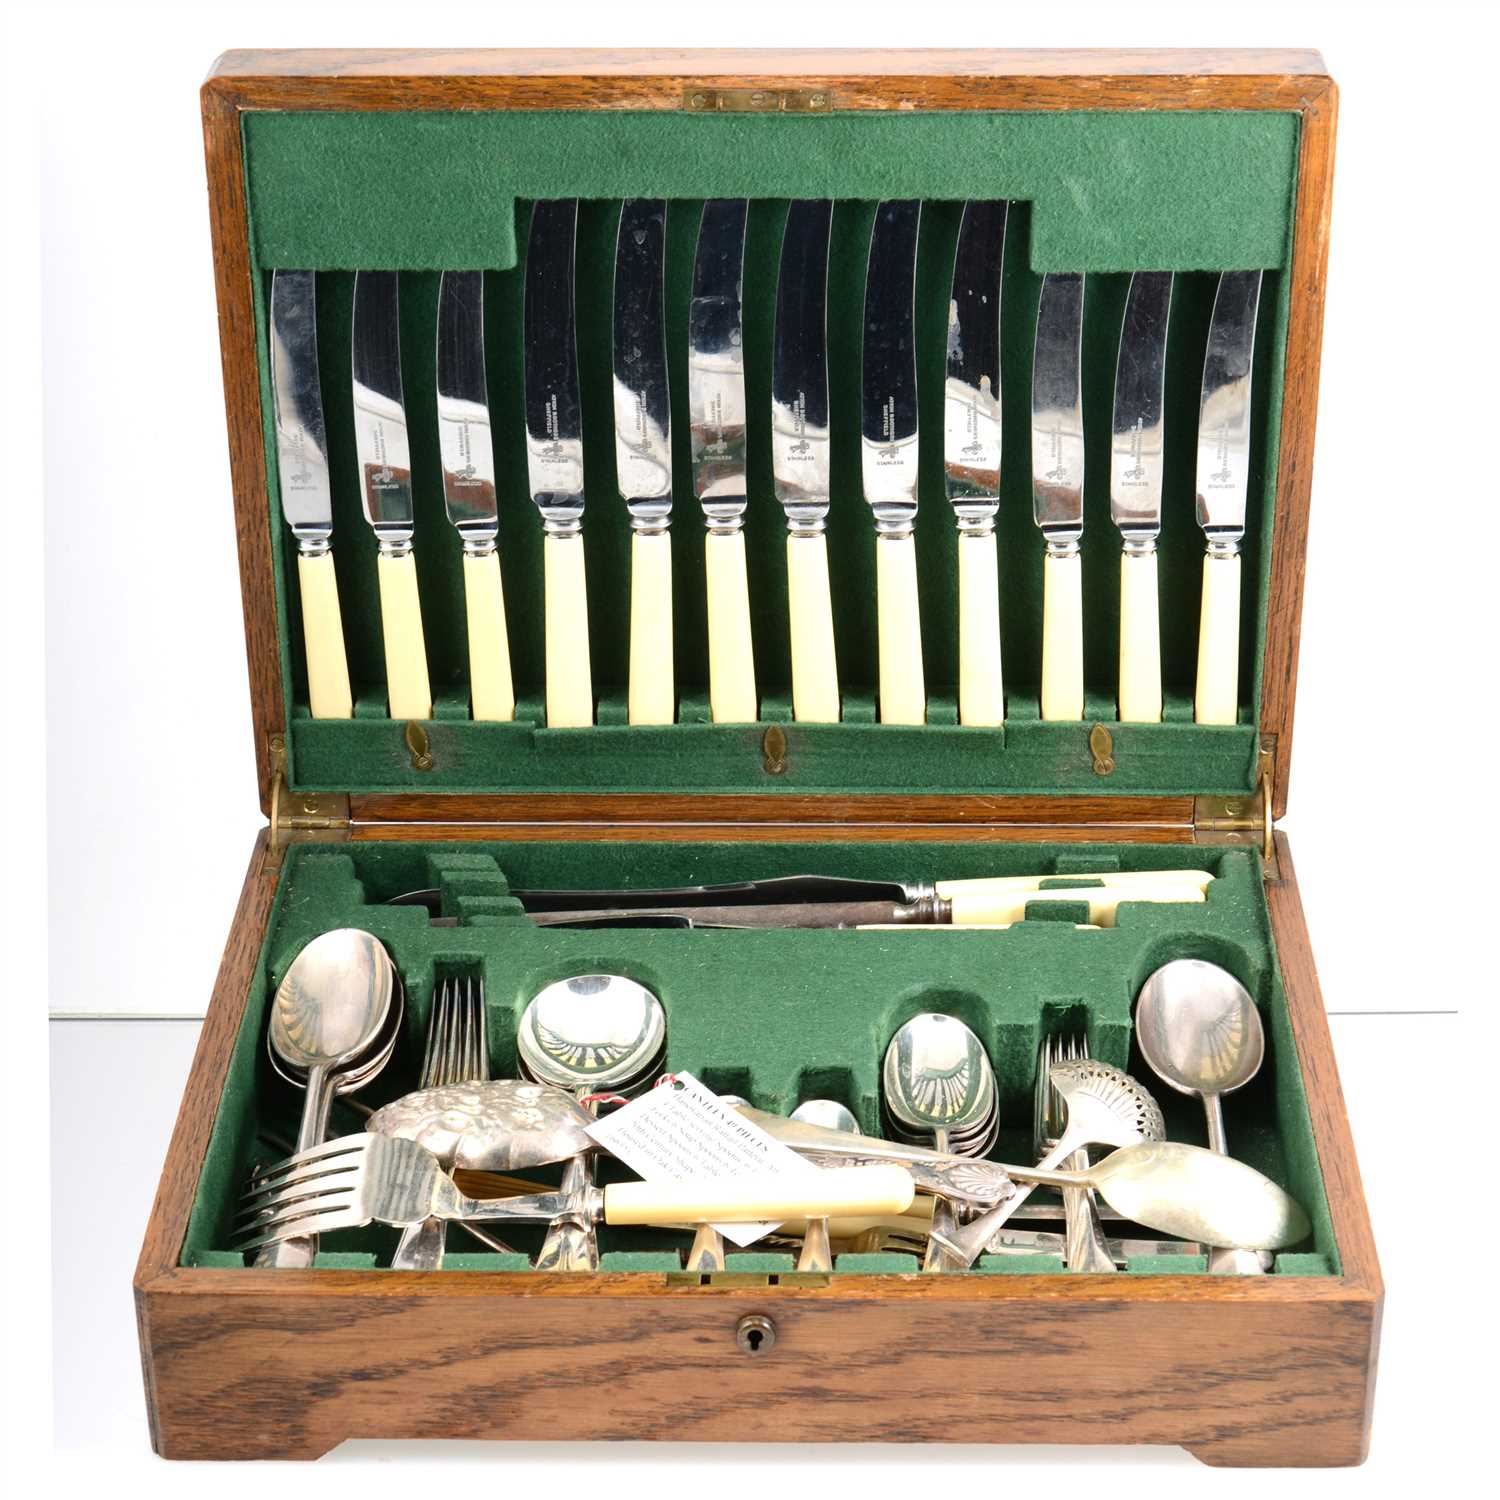 Lot 61 - A silver plated canteen of cutlery by Atkin Brothers, rattail pattern, 6 place settings, in oak case, and another by Walker & Hall, rattail pattern, 6 place settings, almost complete, in dark oak case